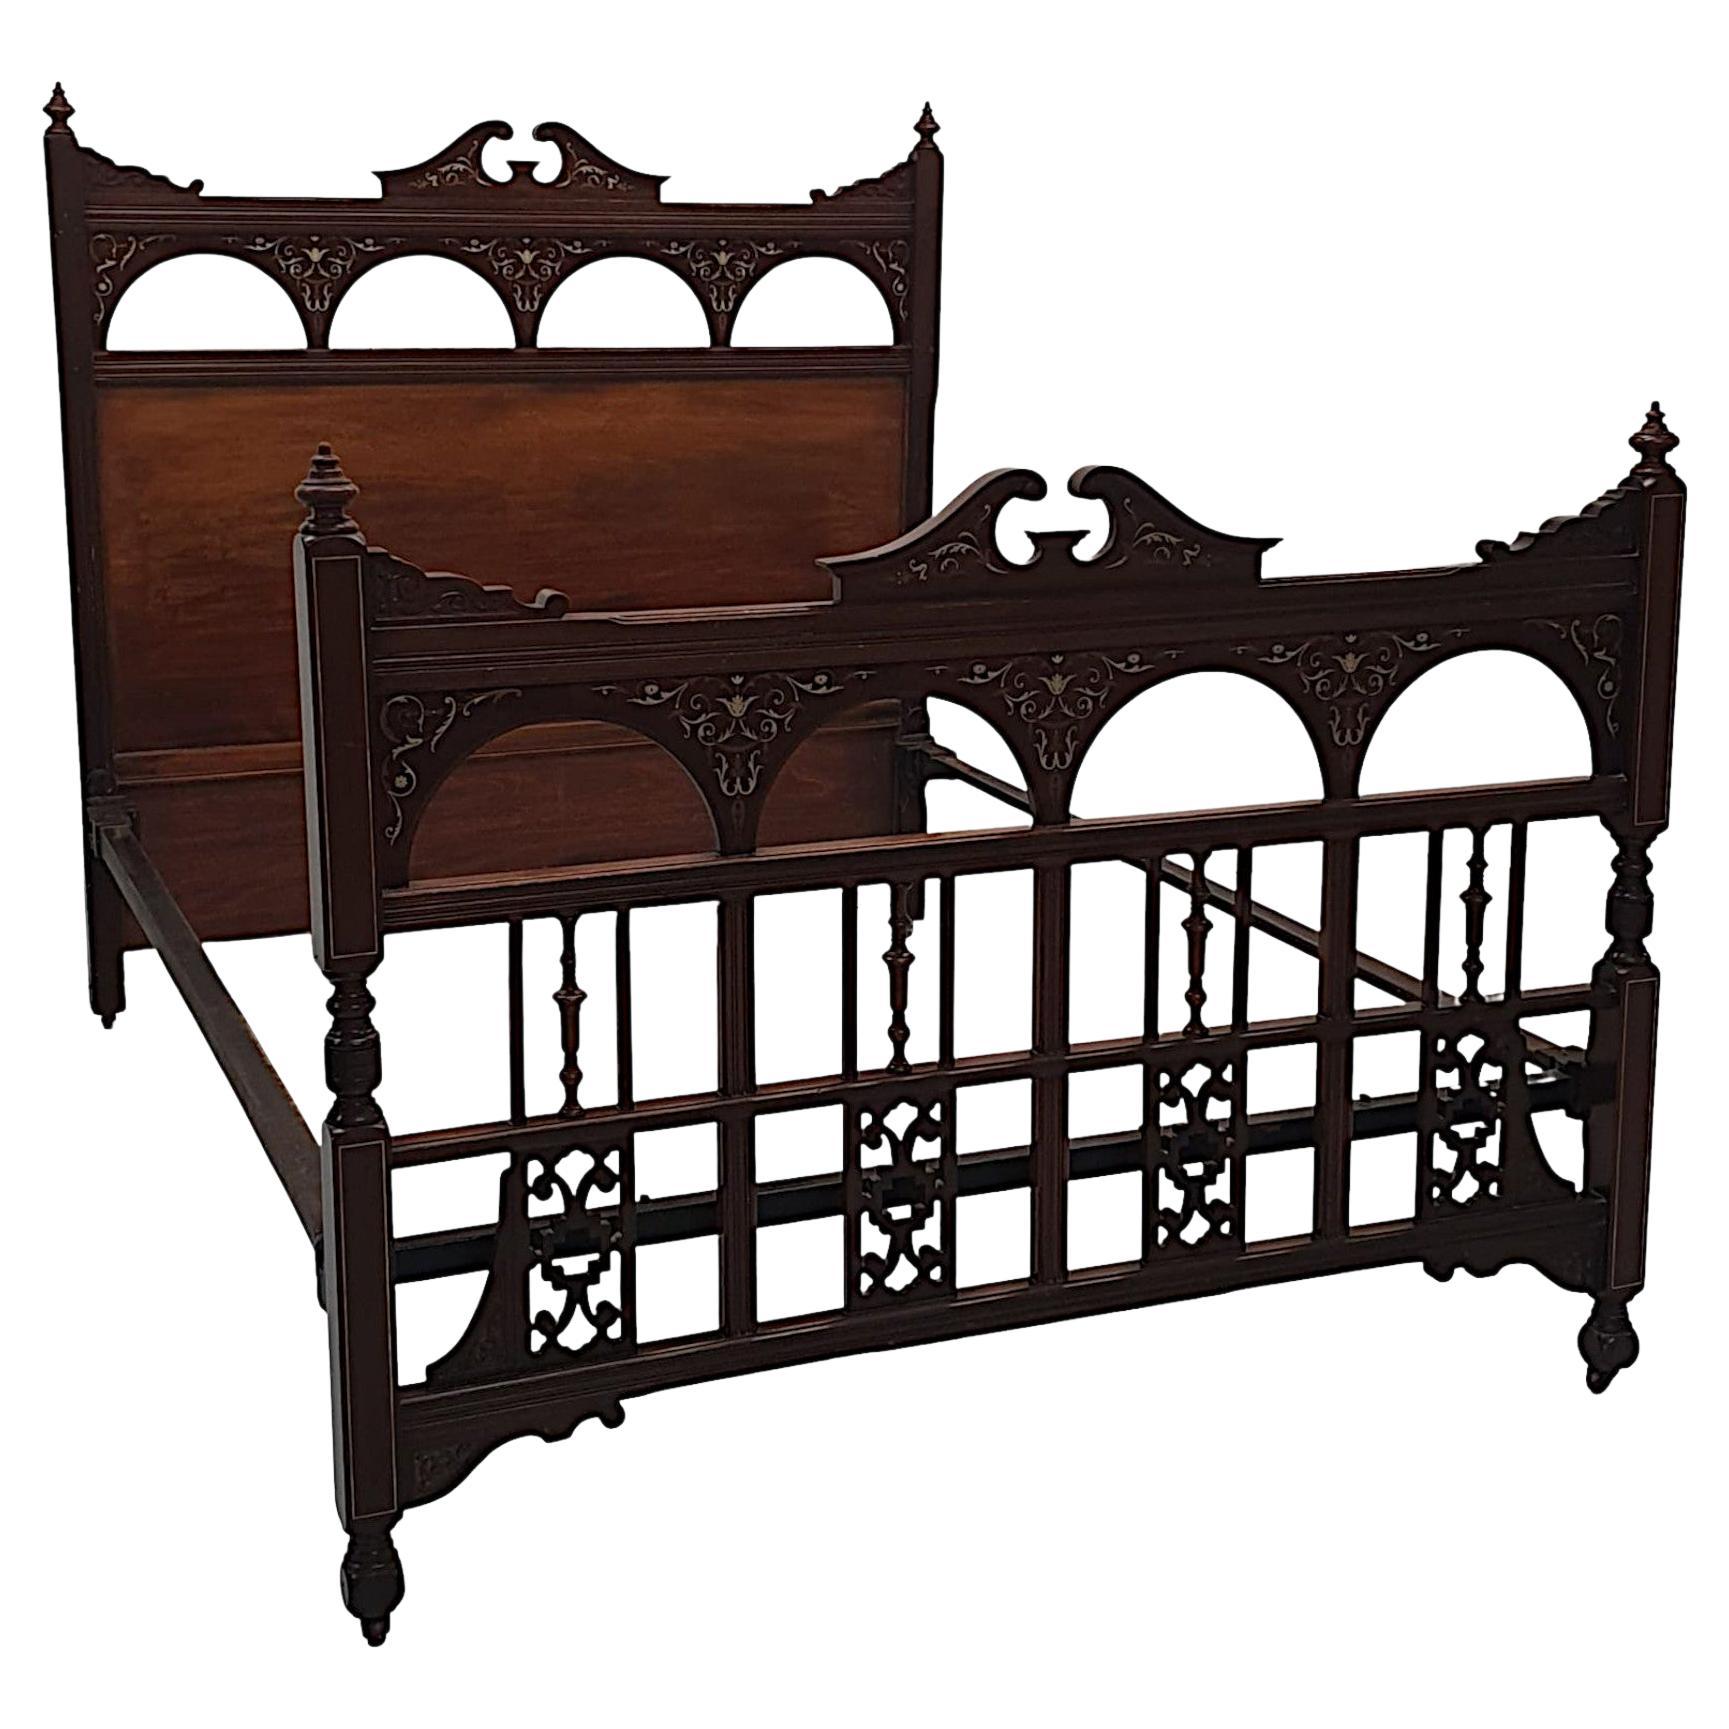 Fabulous Late 19th Century Inlaid Bed For Sale